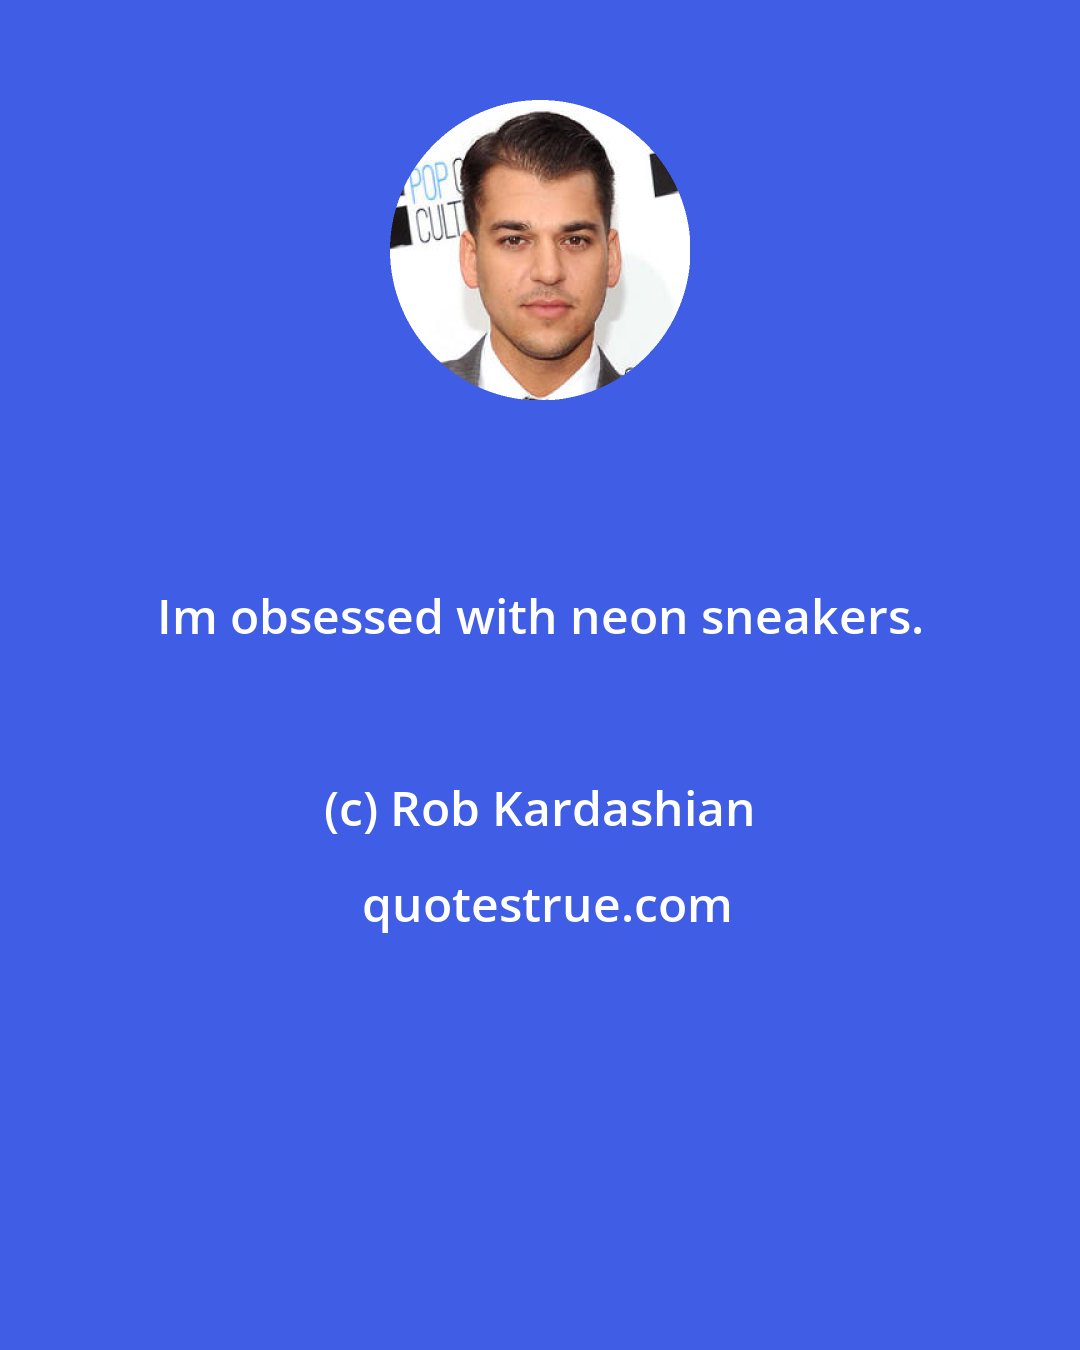 Rob Kardashian: Im obsessed with neon sneakers.